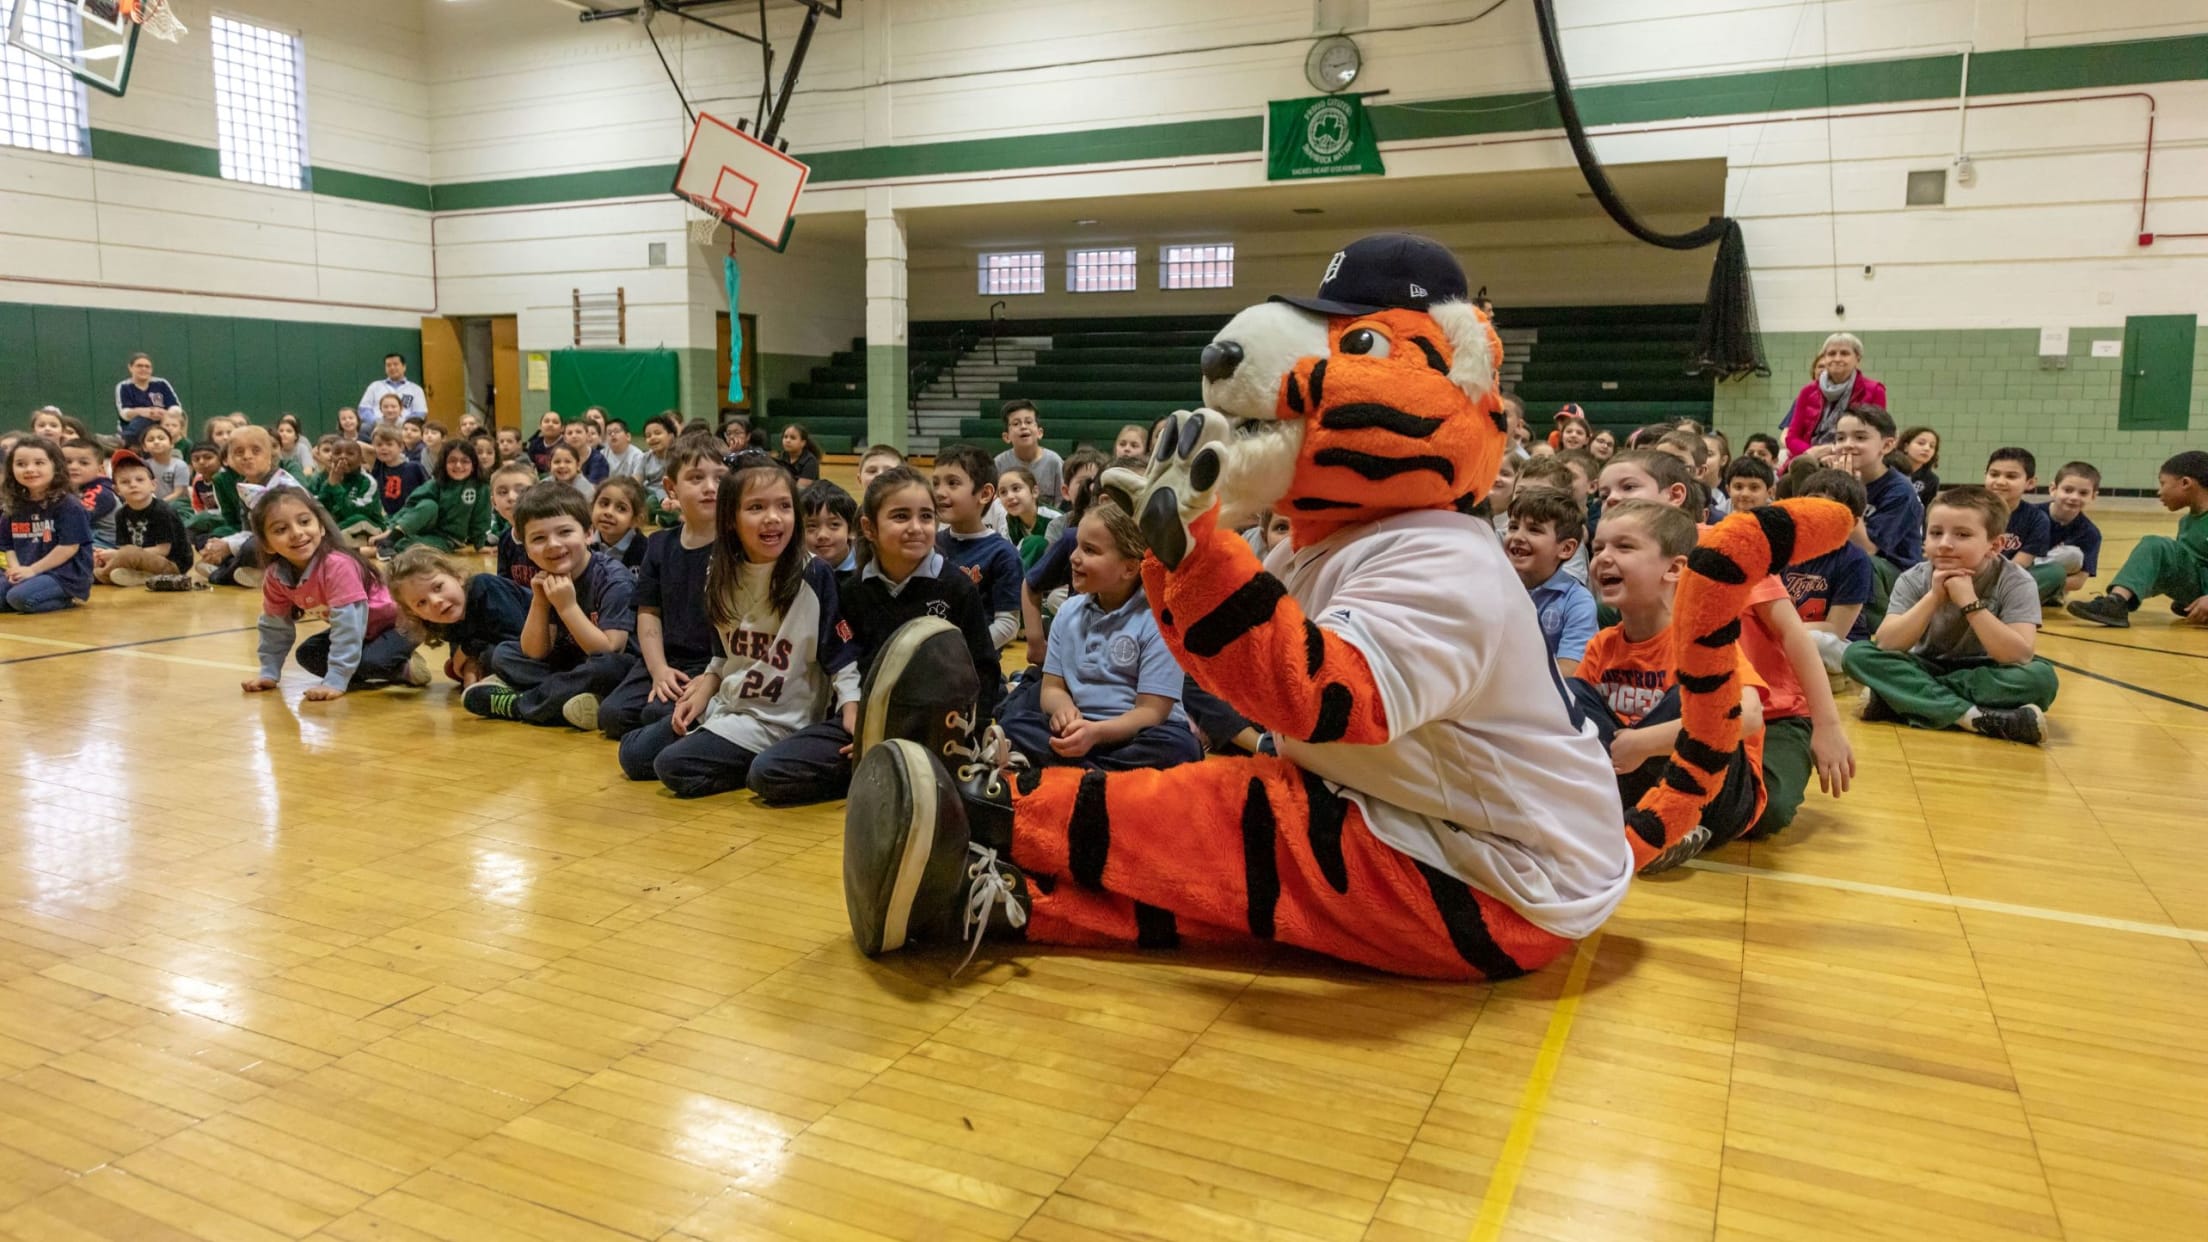 Detroit Tigers mascot Paws named best in MLB